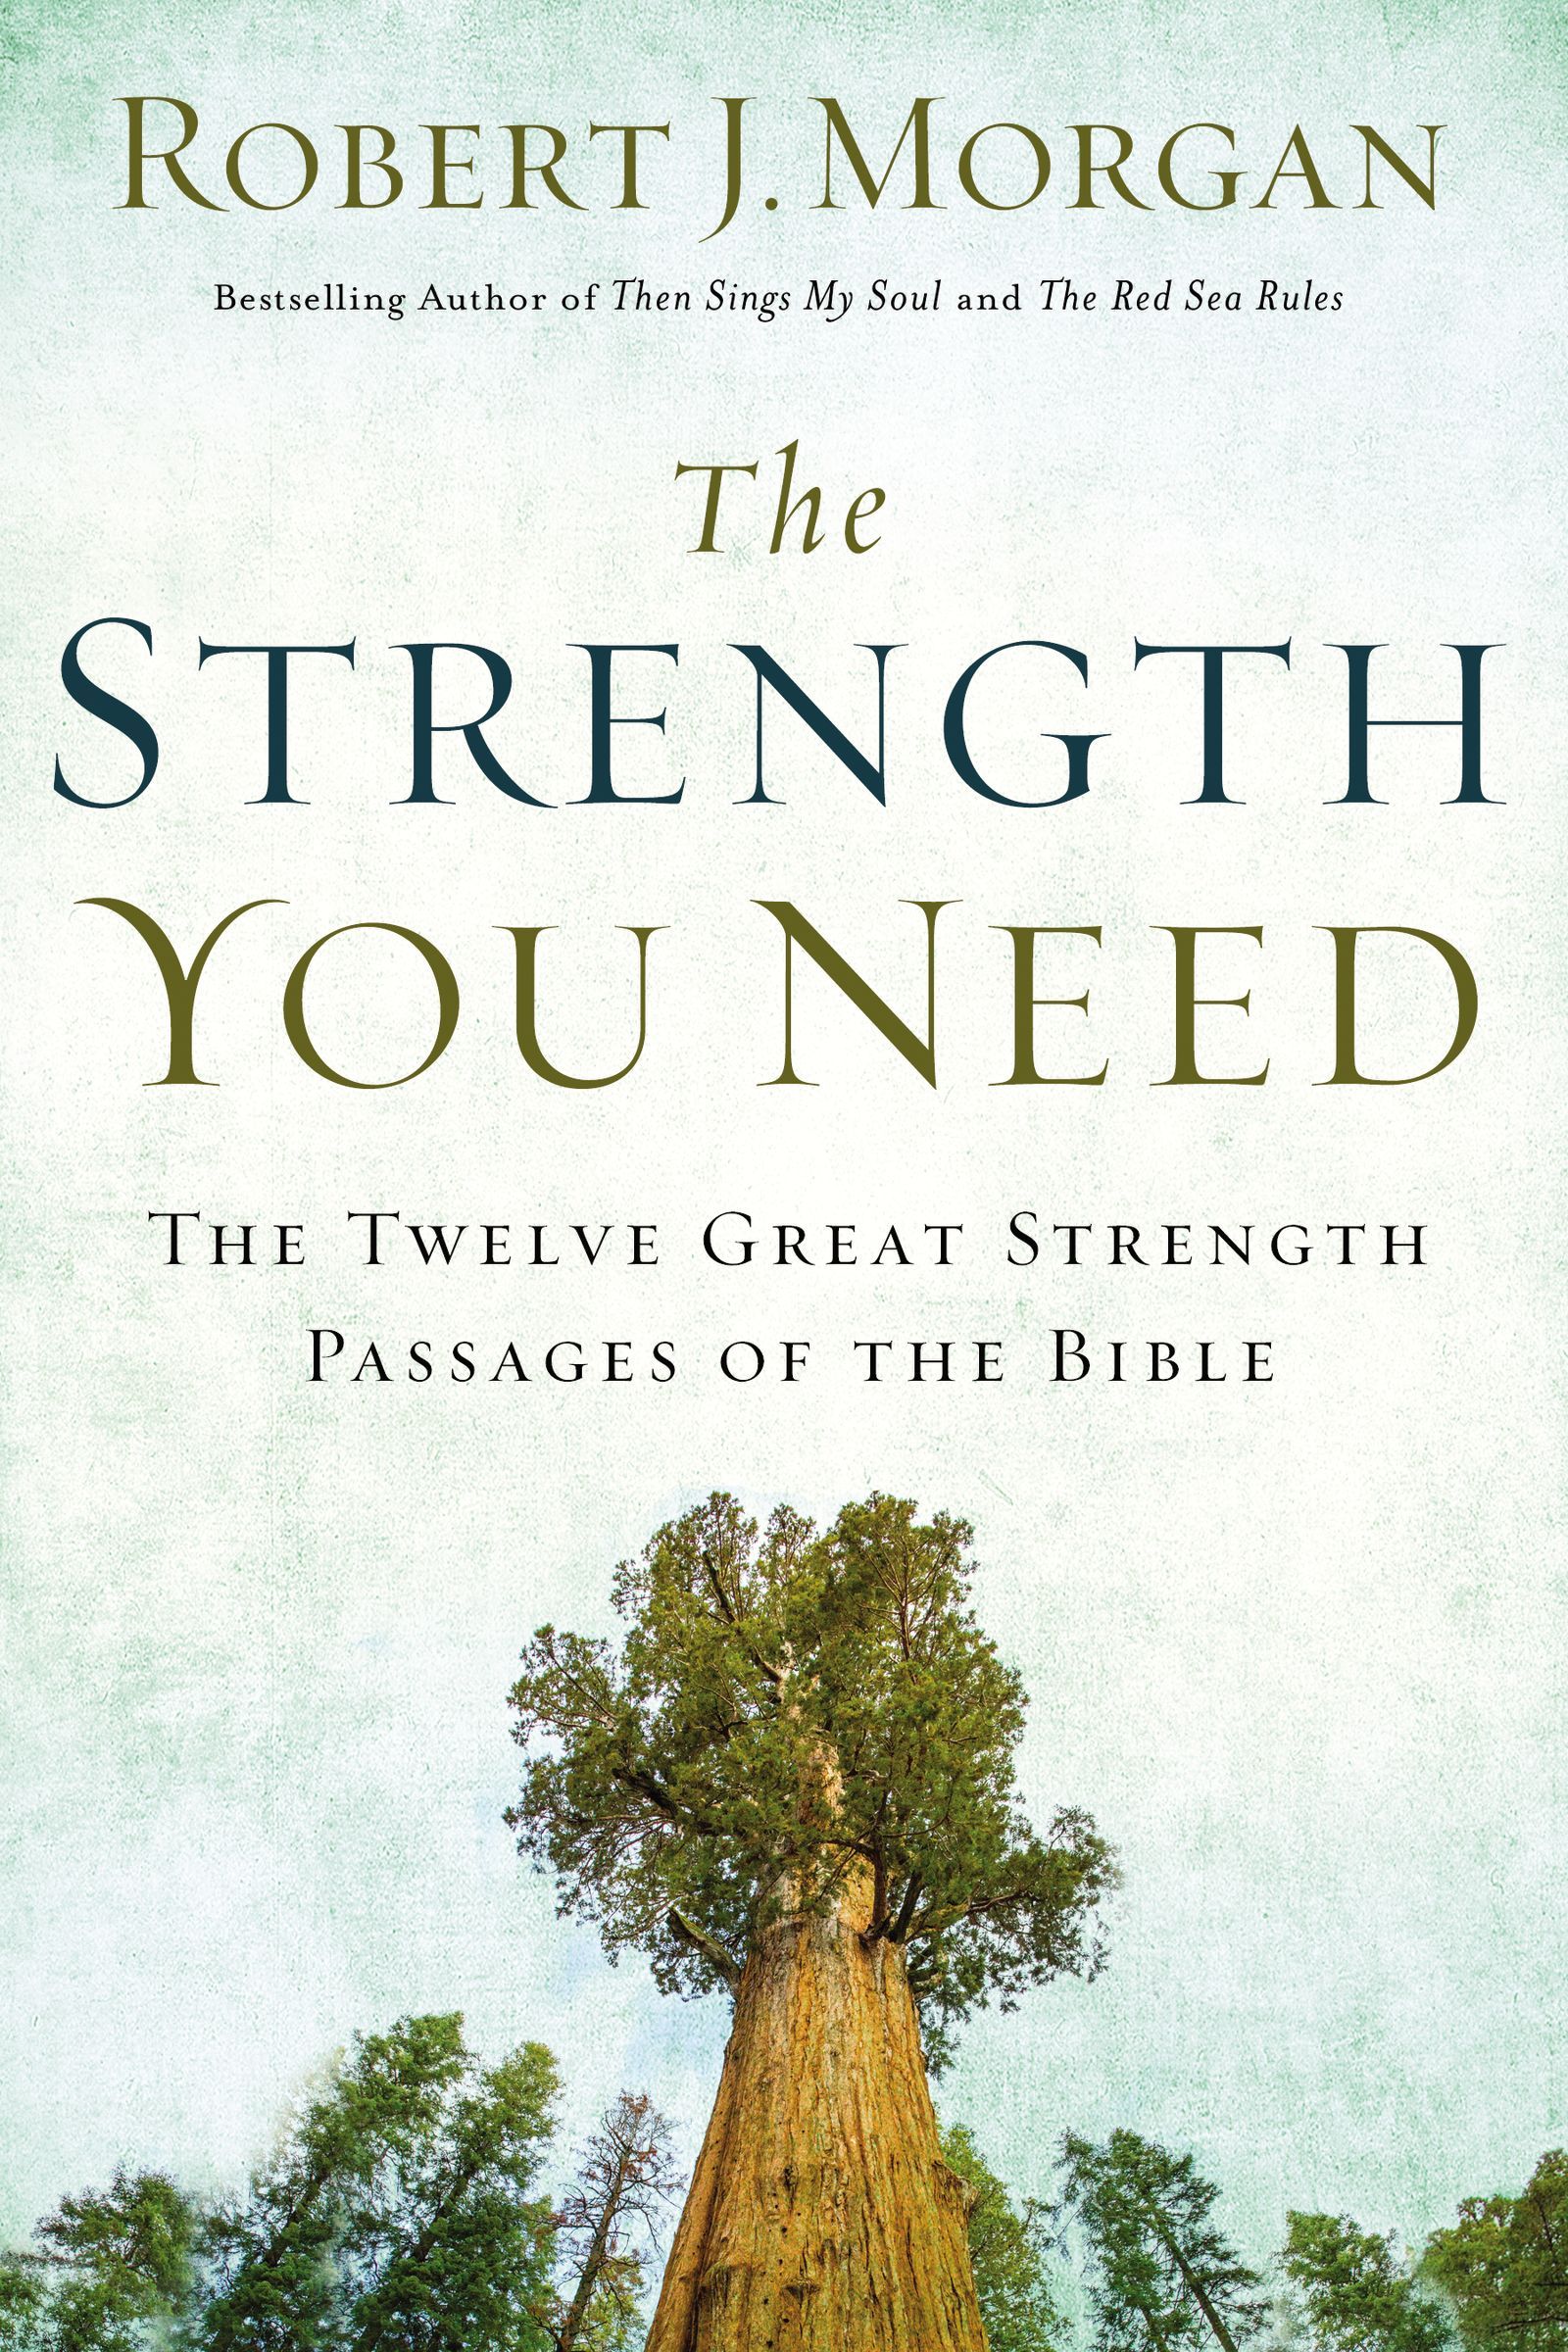 ROCKONLINE | New Creation Church | NCC | Joseph Prince | ROCK Bookshop | ROCK Bookstore | Star Vista | The Strength You Need | Strength | Rest | Robert Morgan | Free delivery for Singapore Orders above $50.